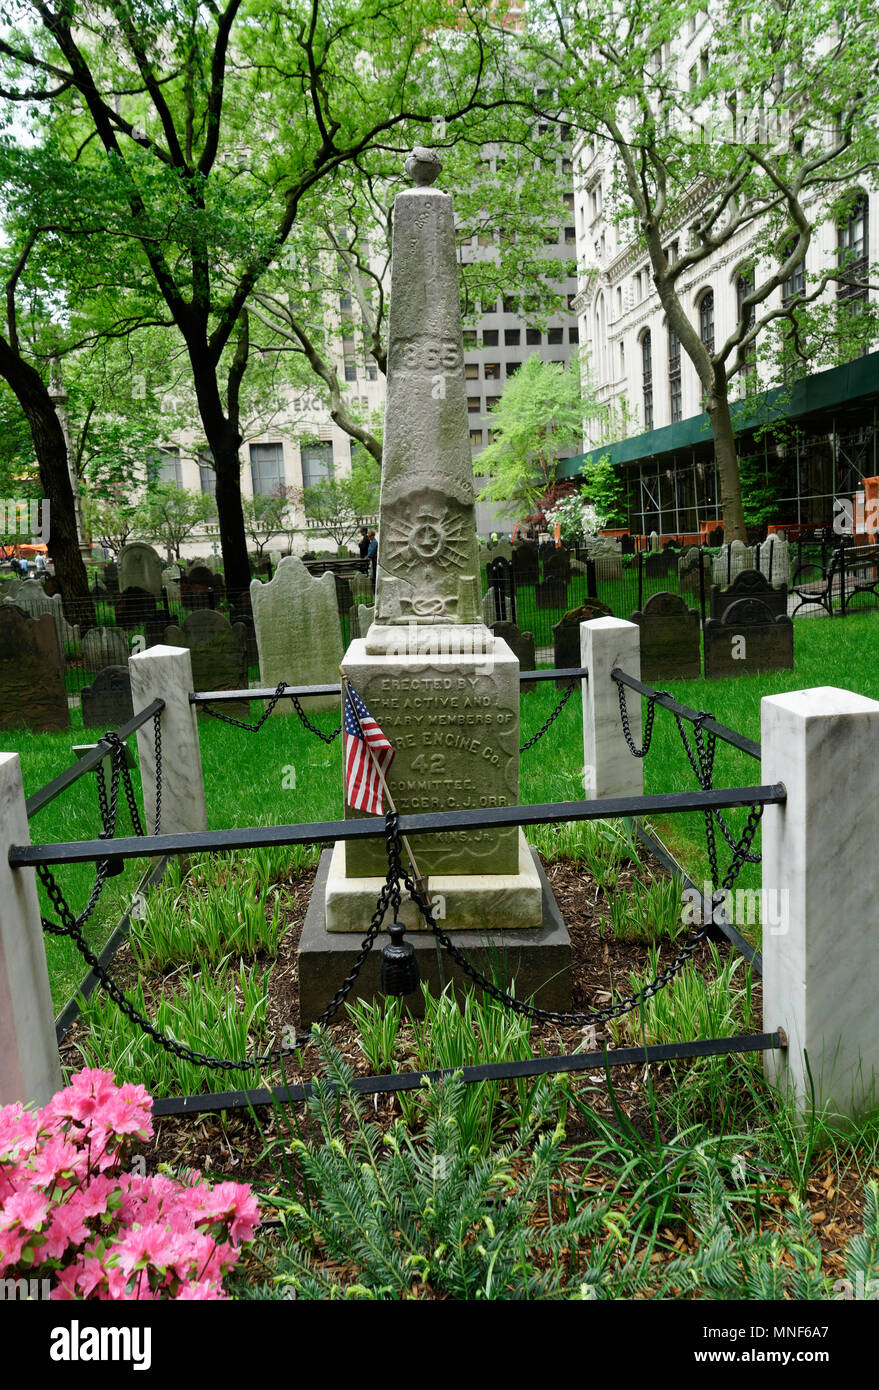 The Fireman’s Memorial Monument in Trinity Church’s Manhattan graveyard was erected in 1865 by volunteer firemen to honor their dead comrades. Stock Photo